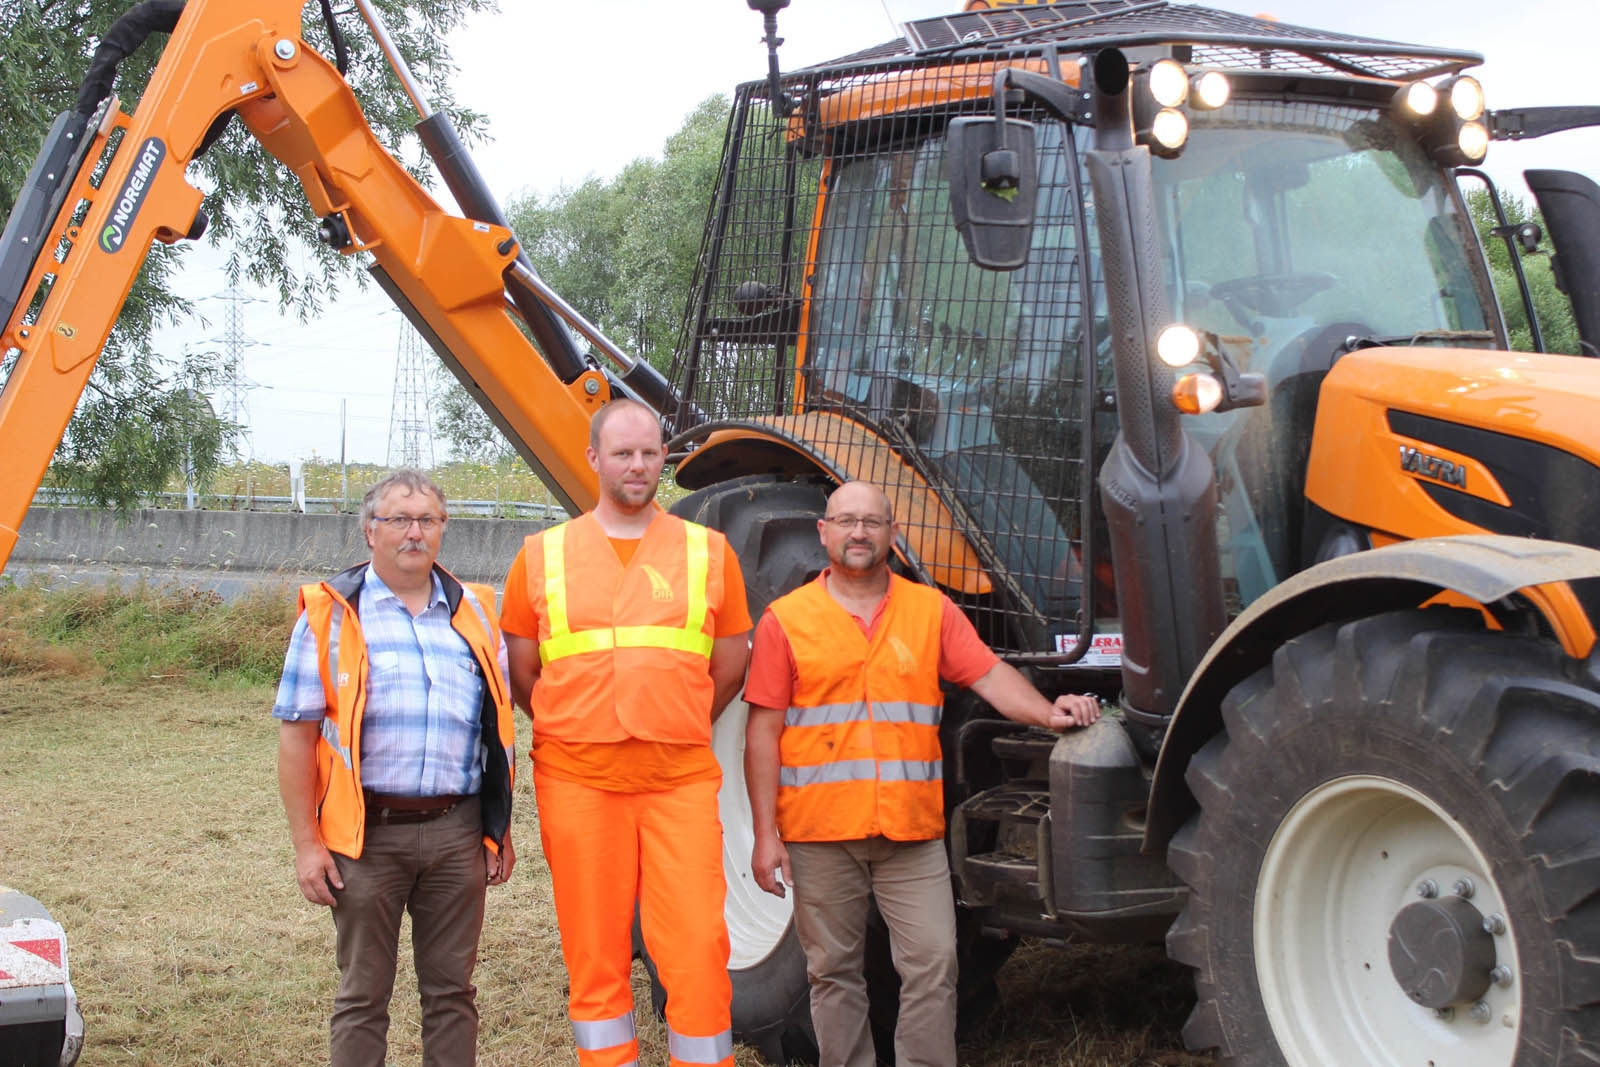 Marc Reze, Guillaume Oger and Sylvain Prouet are satisfied with their tailored Valtra tractors.